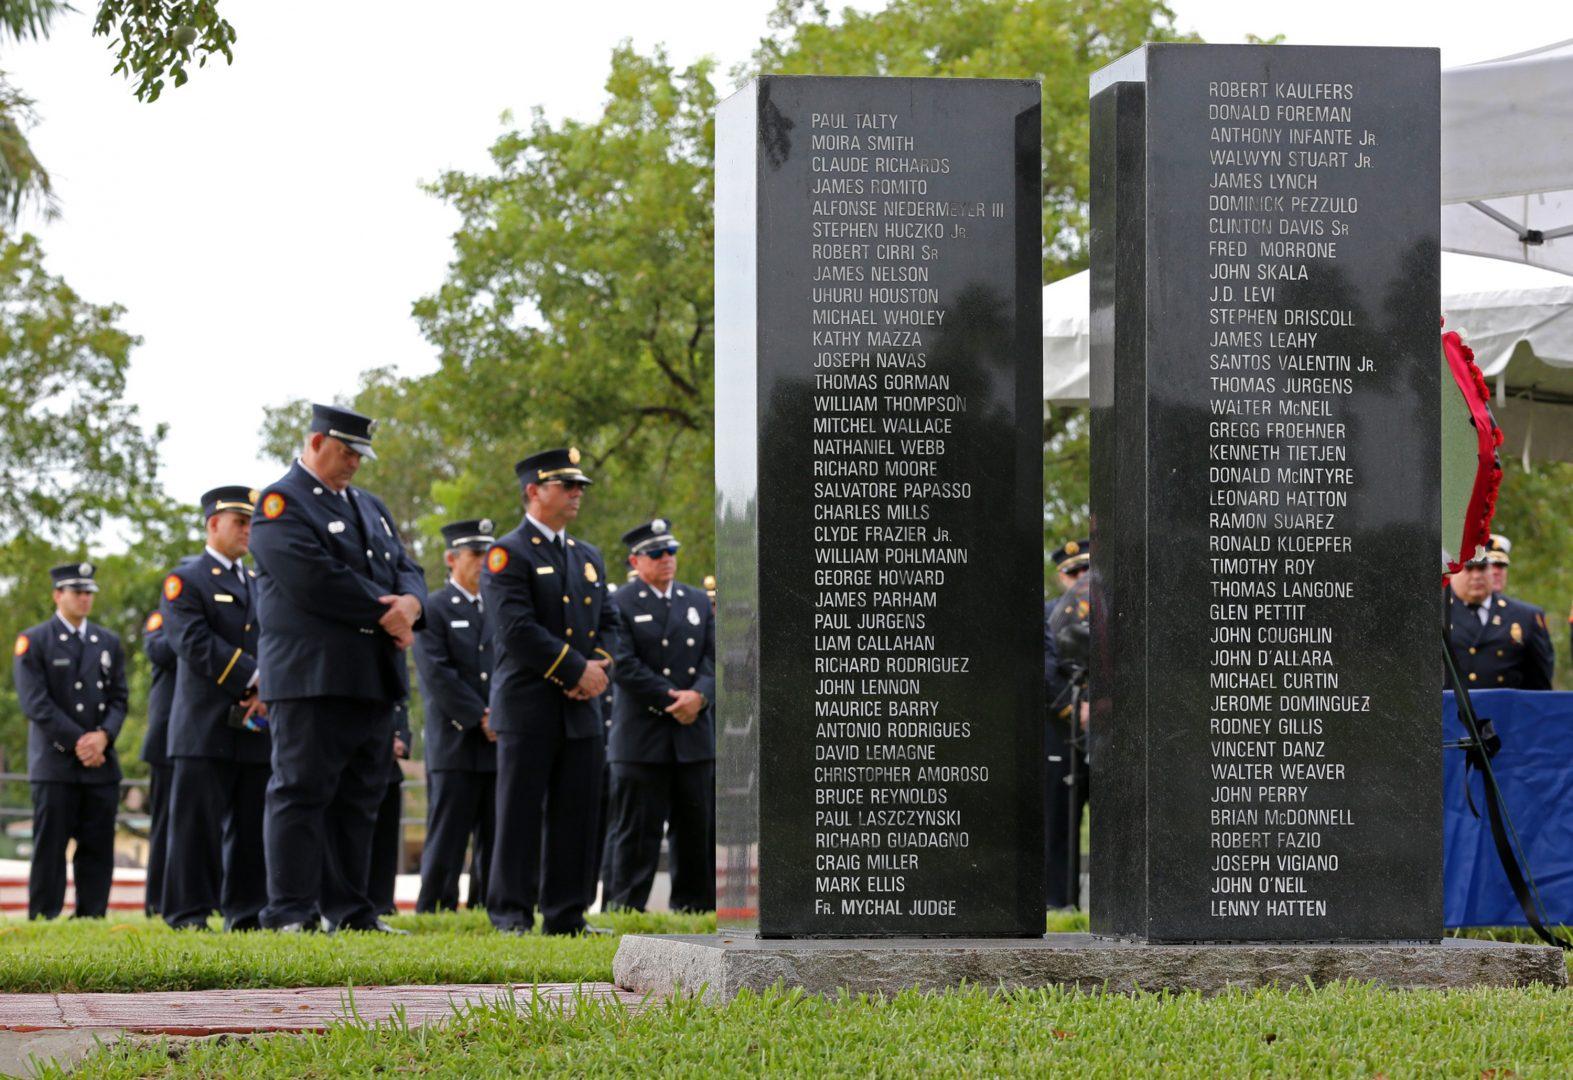 Firefighters+and+police+attend+the+9%2F11+Ceremony+of+Remembrance+at+Tropical+Park%2C+hosted+by+the+Miami-Dade+Police+Department+and+Miami-Dade+Fire+Rescue%2C+on+Tuesday%2C+Sept.+11%2C+2018+in+Miami%2C+Fla.+%28Al+Diaz%2FMiami+Herald%2FTNS%29